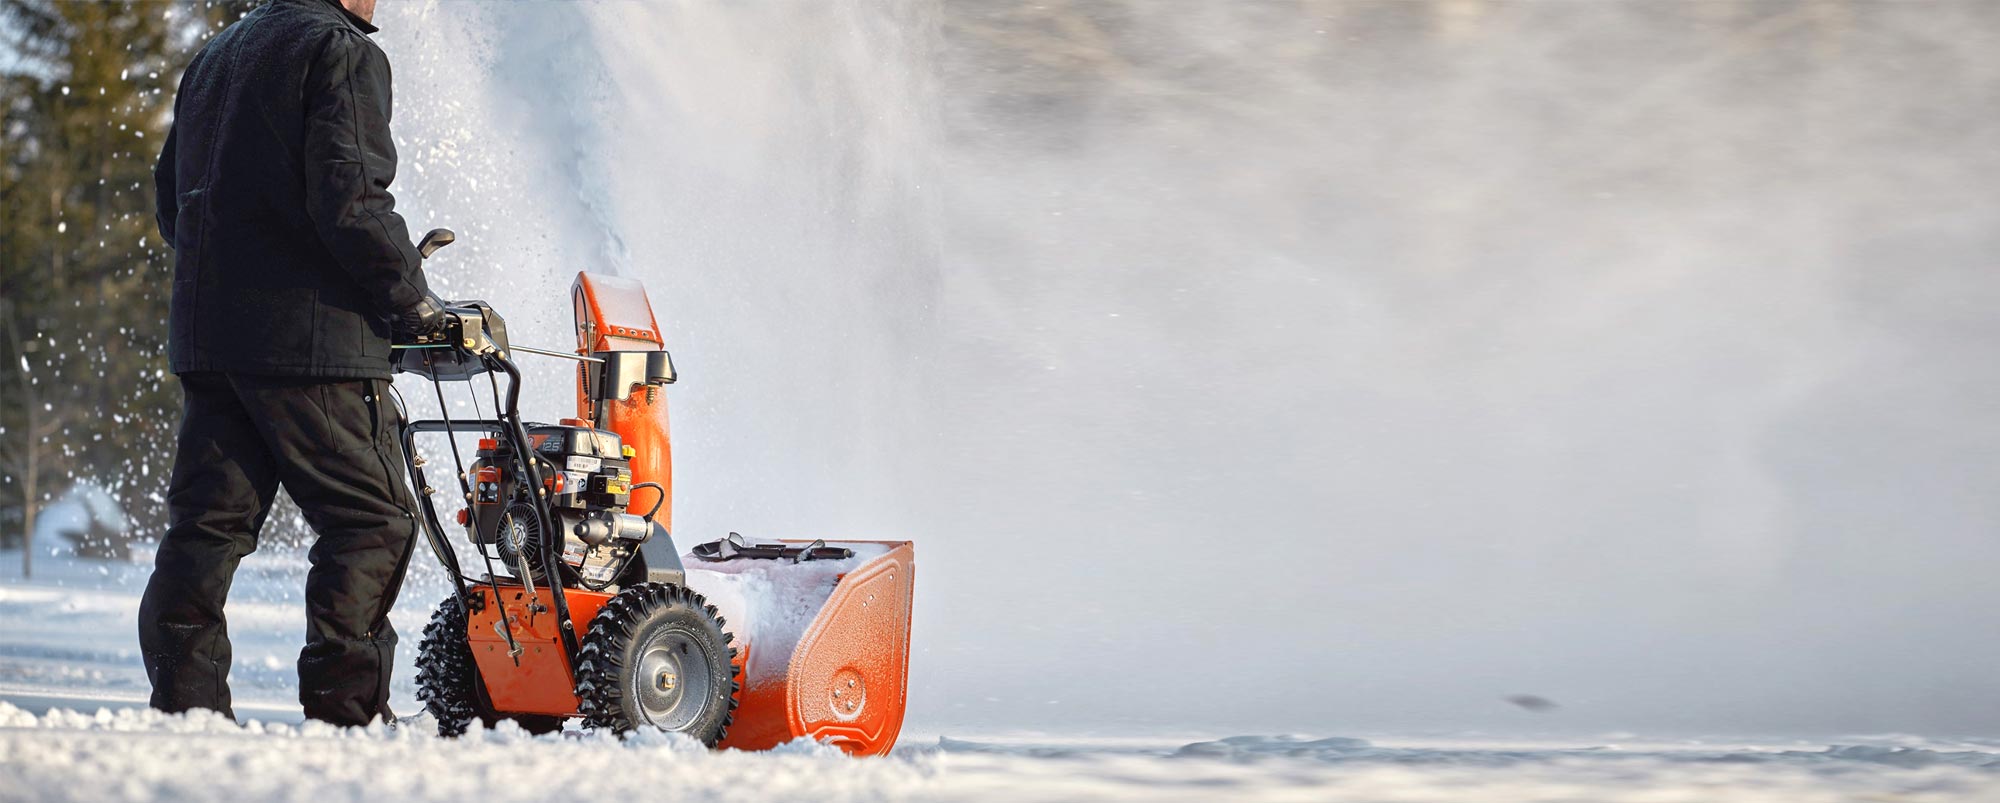 Man using an orange Ariens Snowblower to move snow in the winter